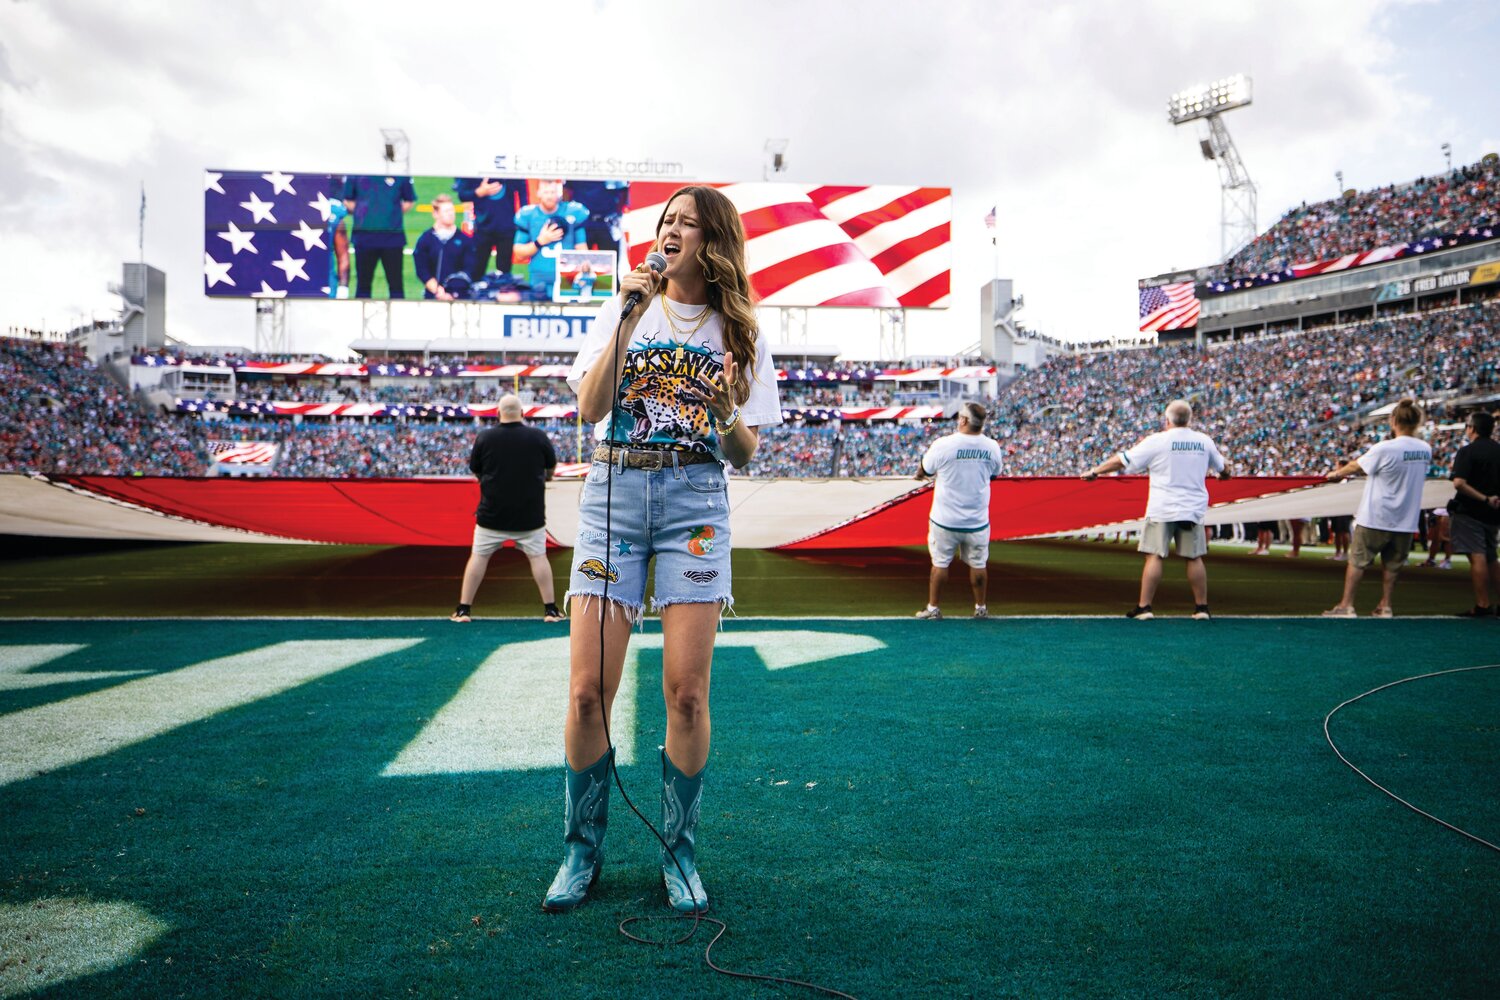 Ponte Vedra Beach native Madison Hughes sang the National Anthem prior to the Jacksonville Jaguars home opener against the Kansas City Chiefs on Sept. 10.